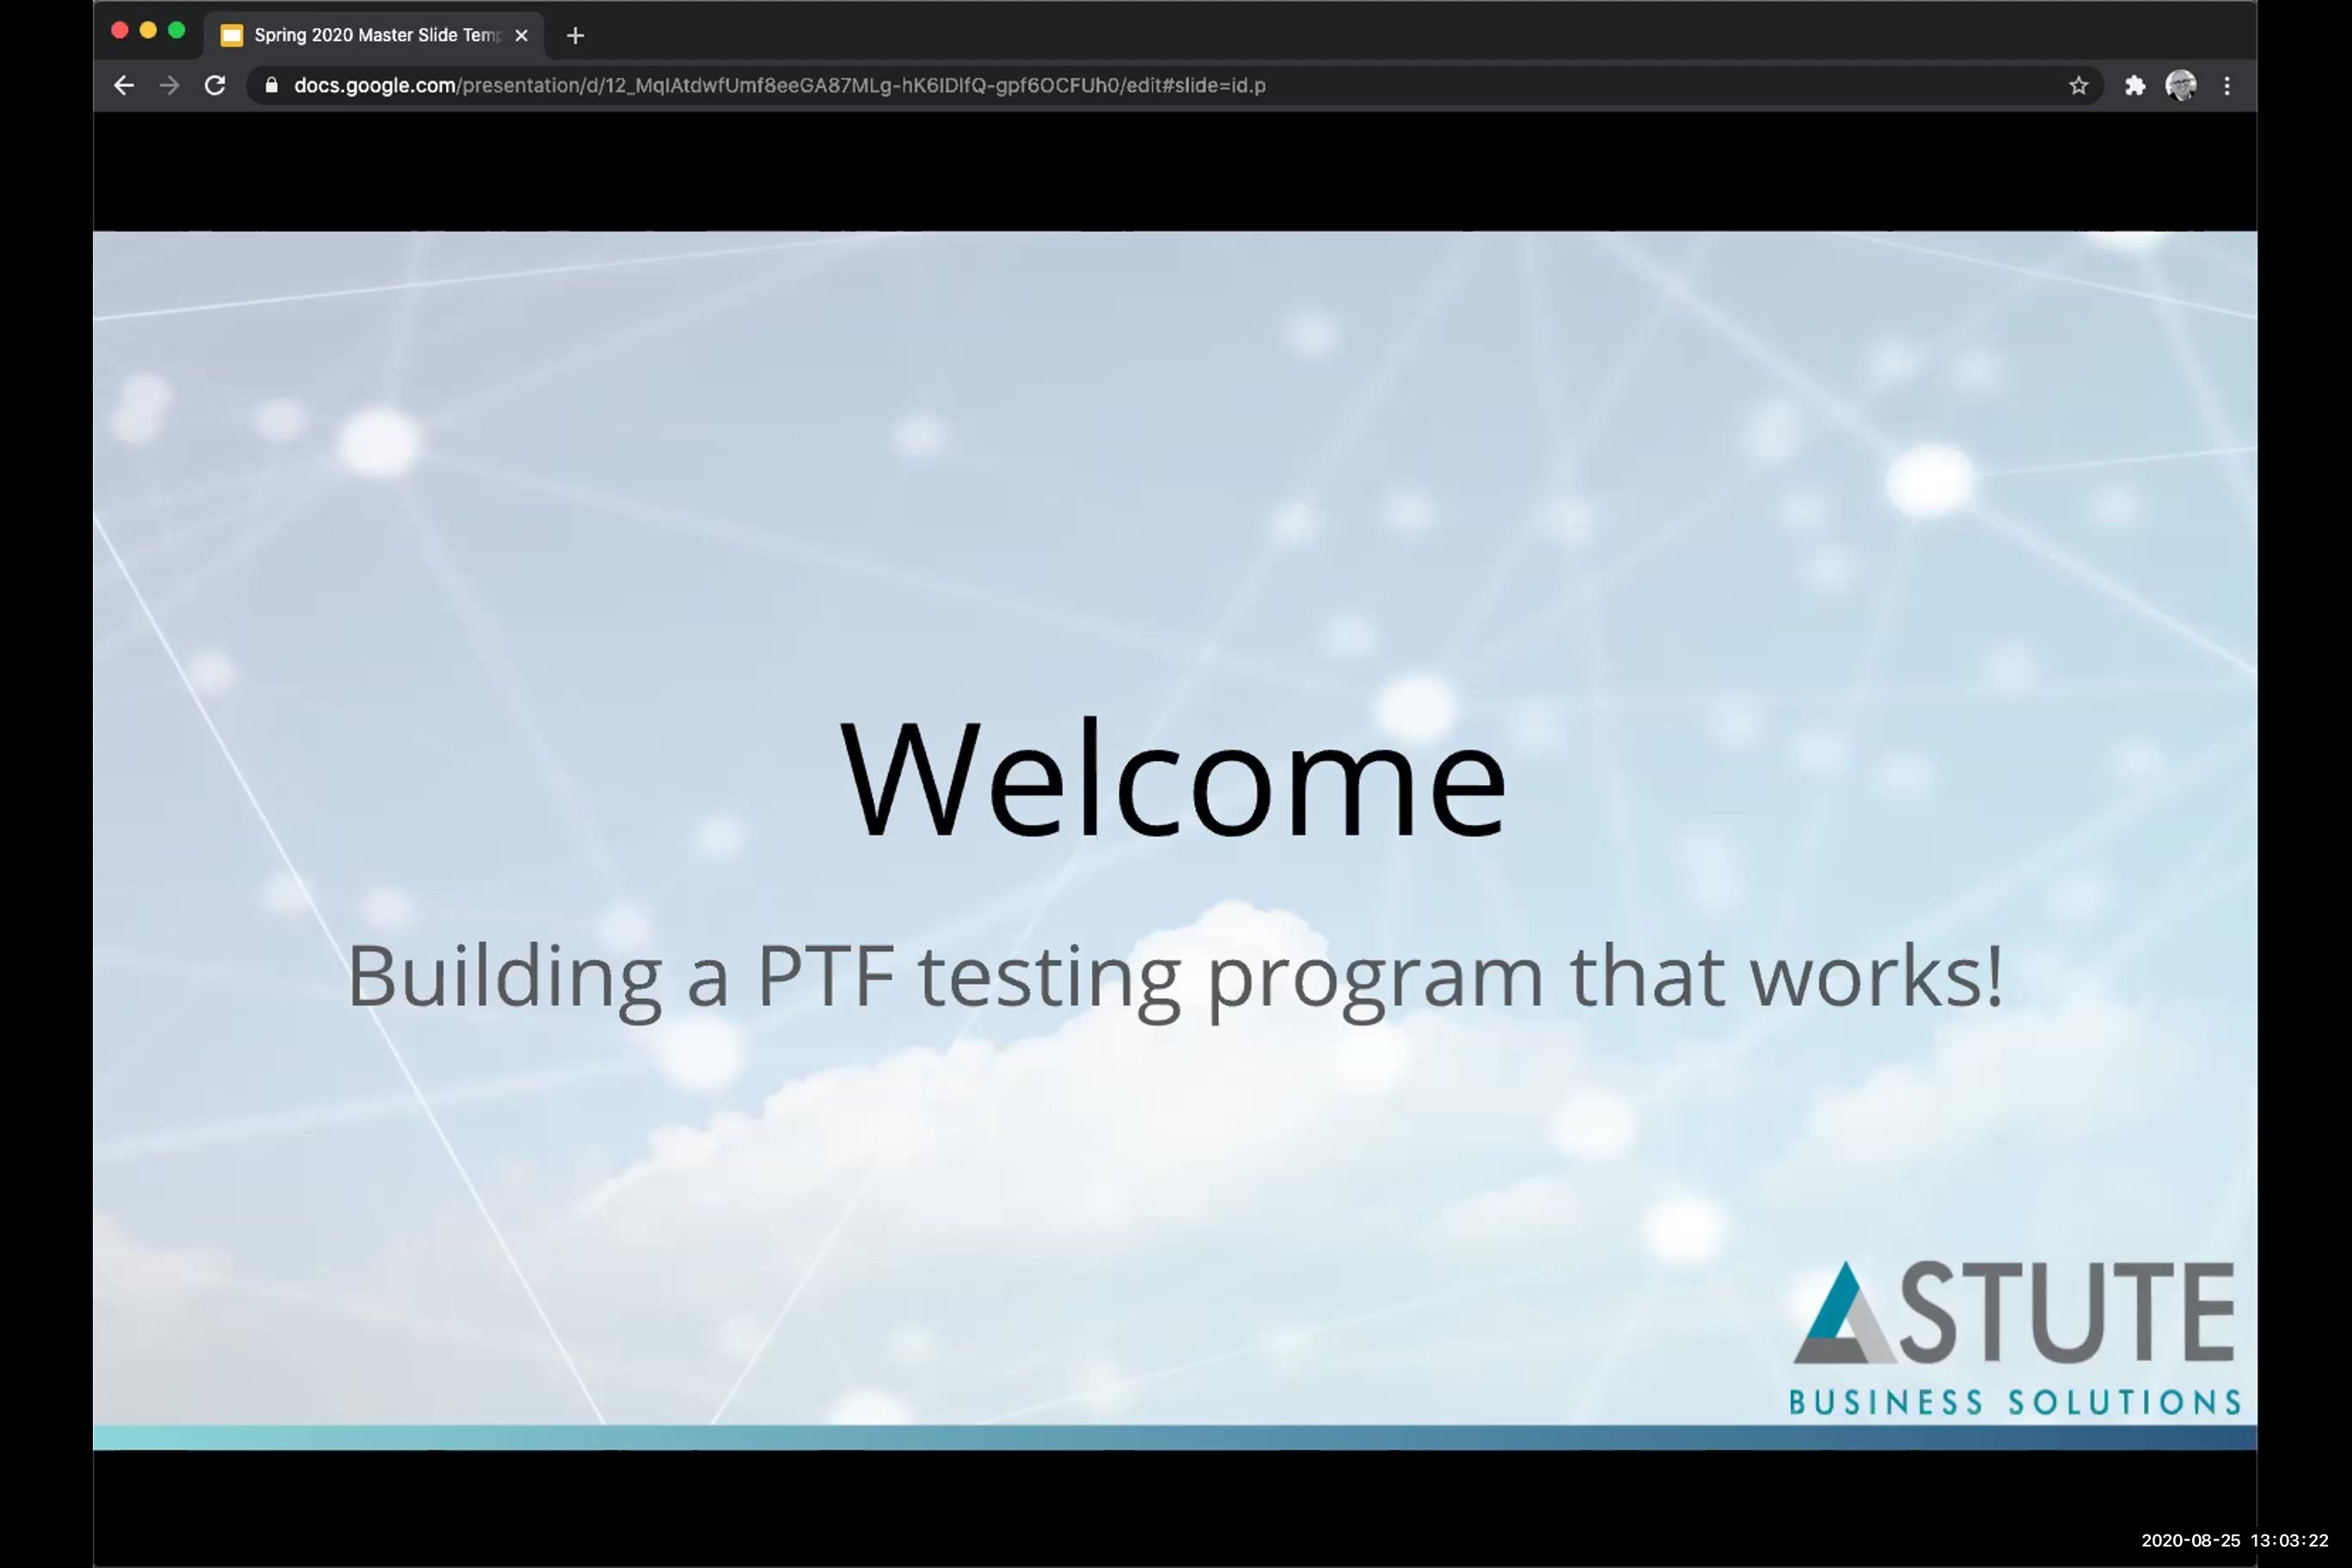 Building a PTF Program that Works